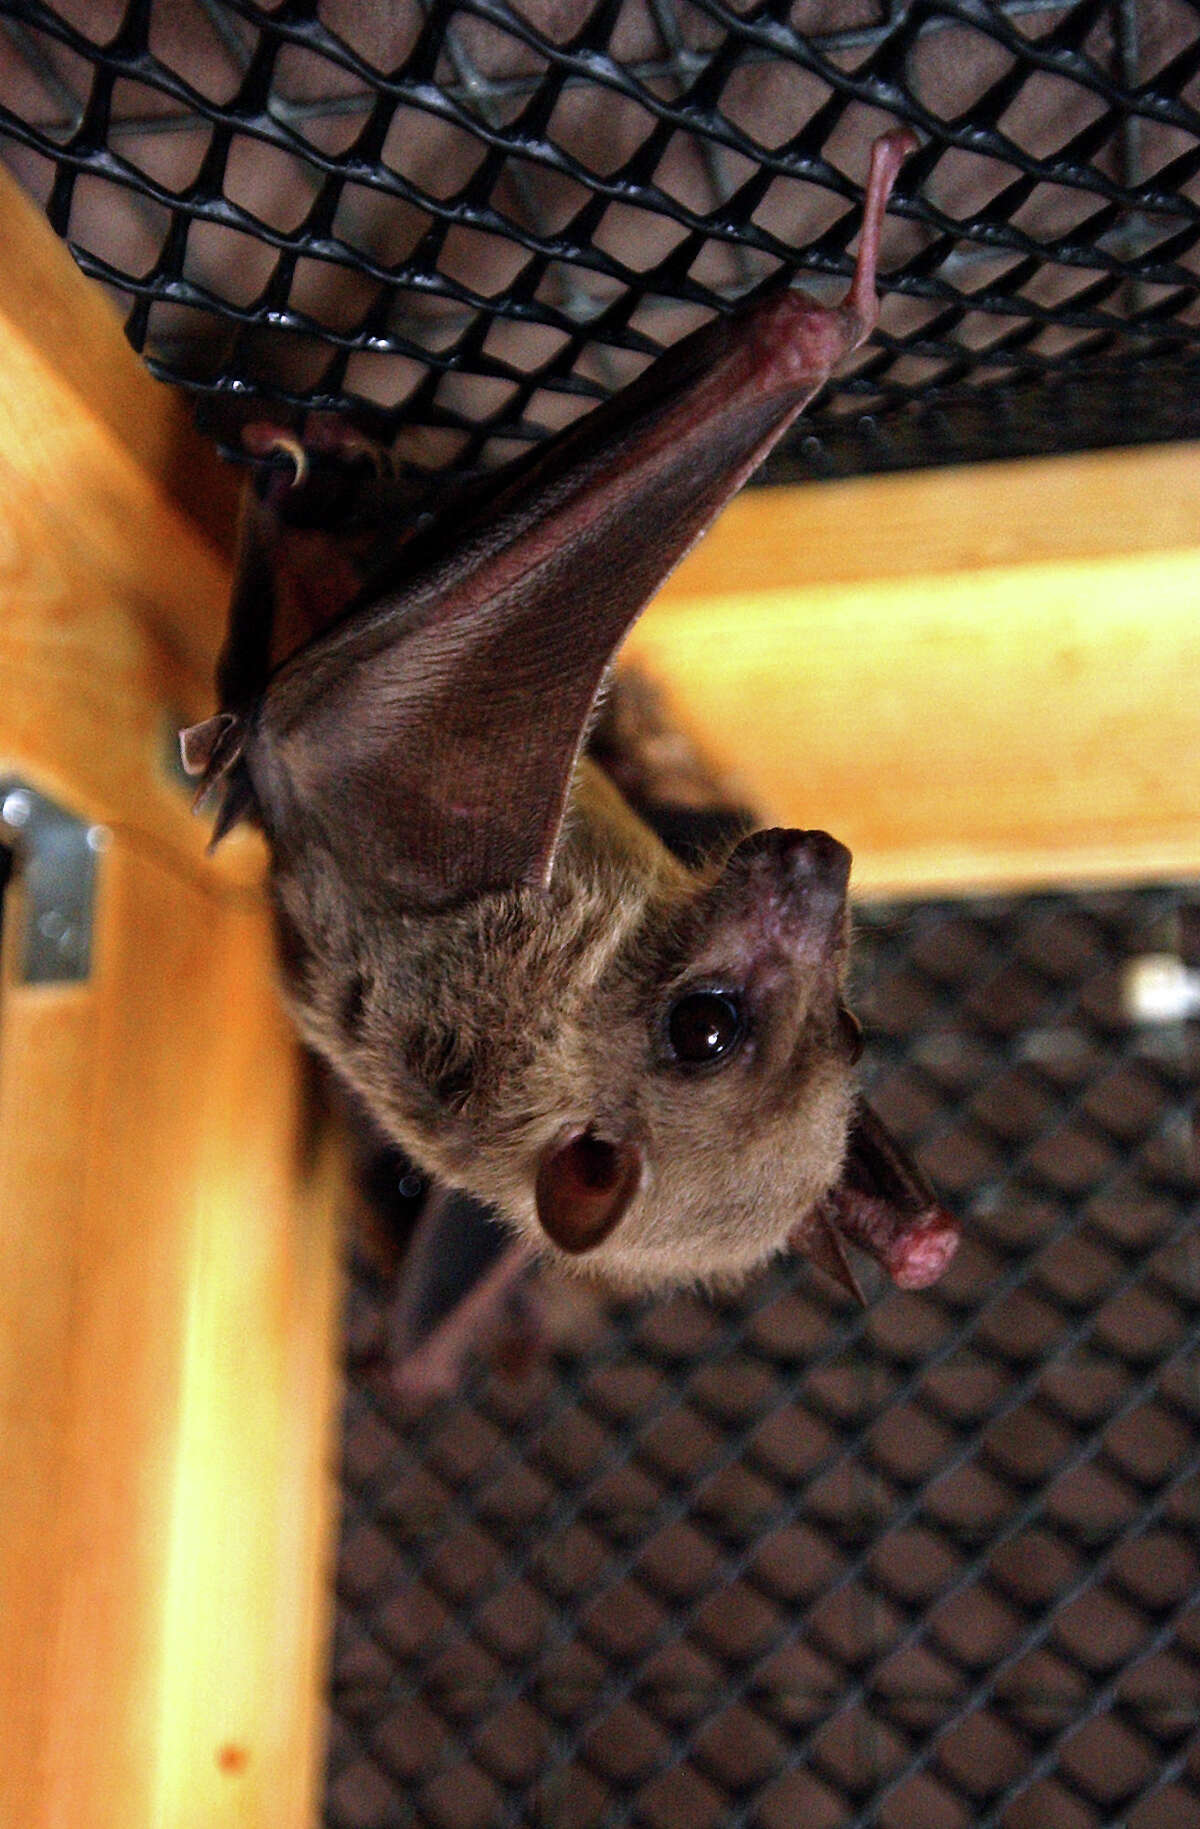 The Huron County Health Department has been notified of a second rabid bat for this year. As of June 2, 16 rabid bats have been identified across Michigan.